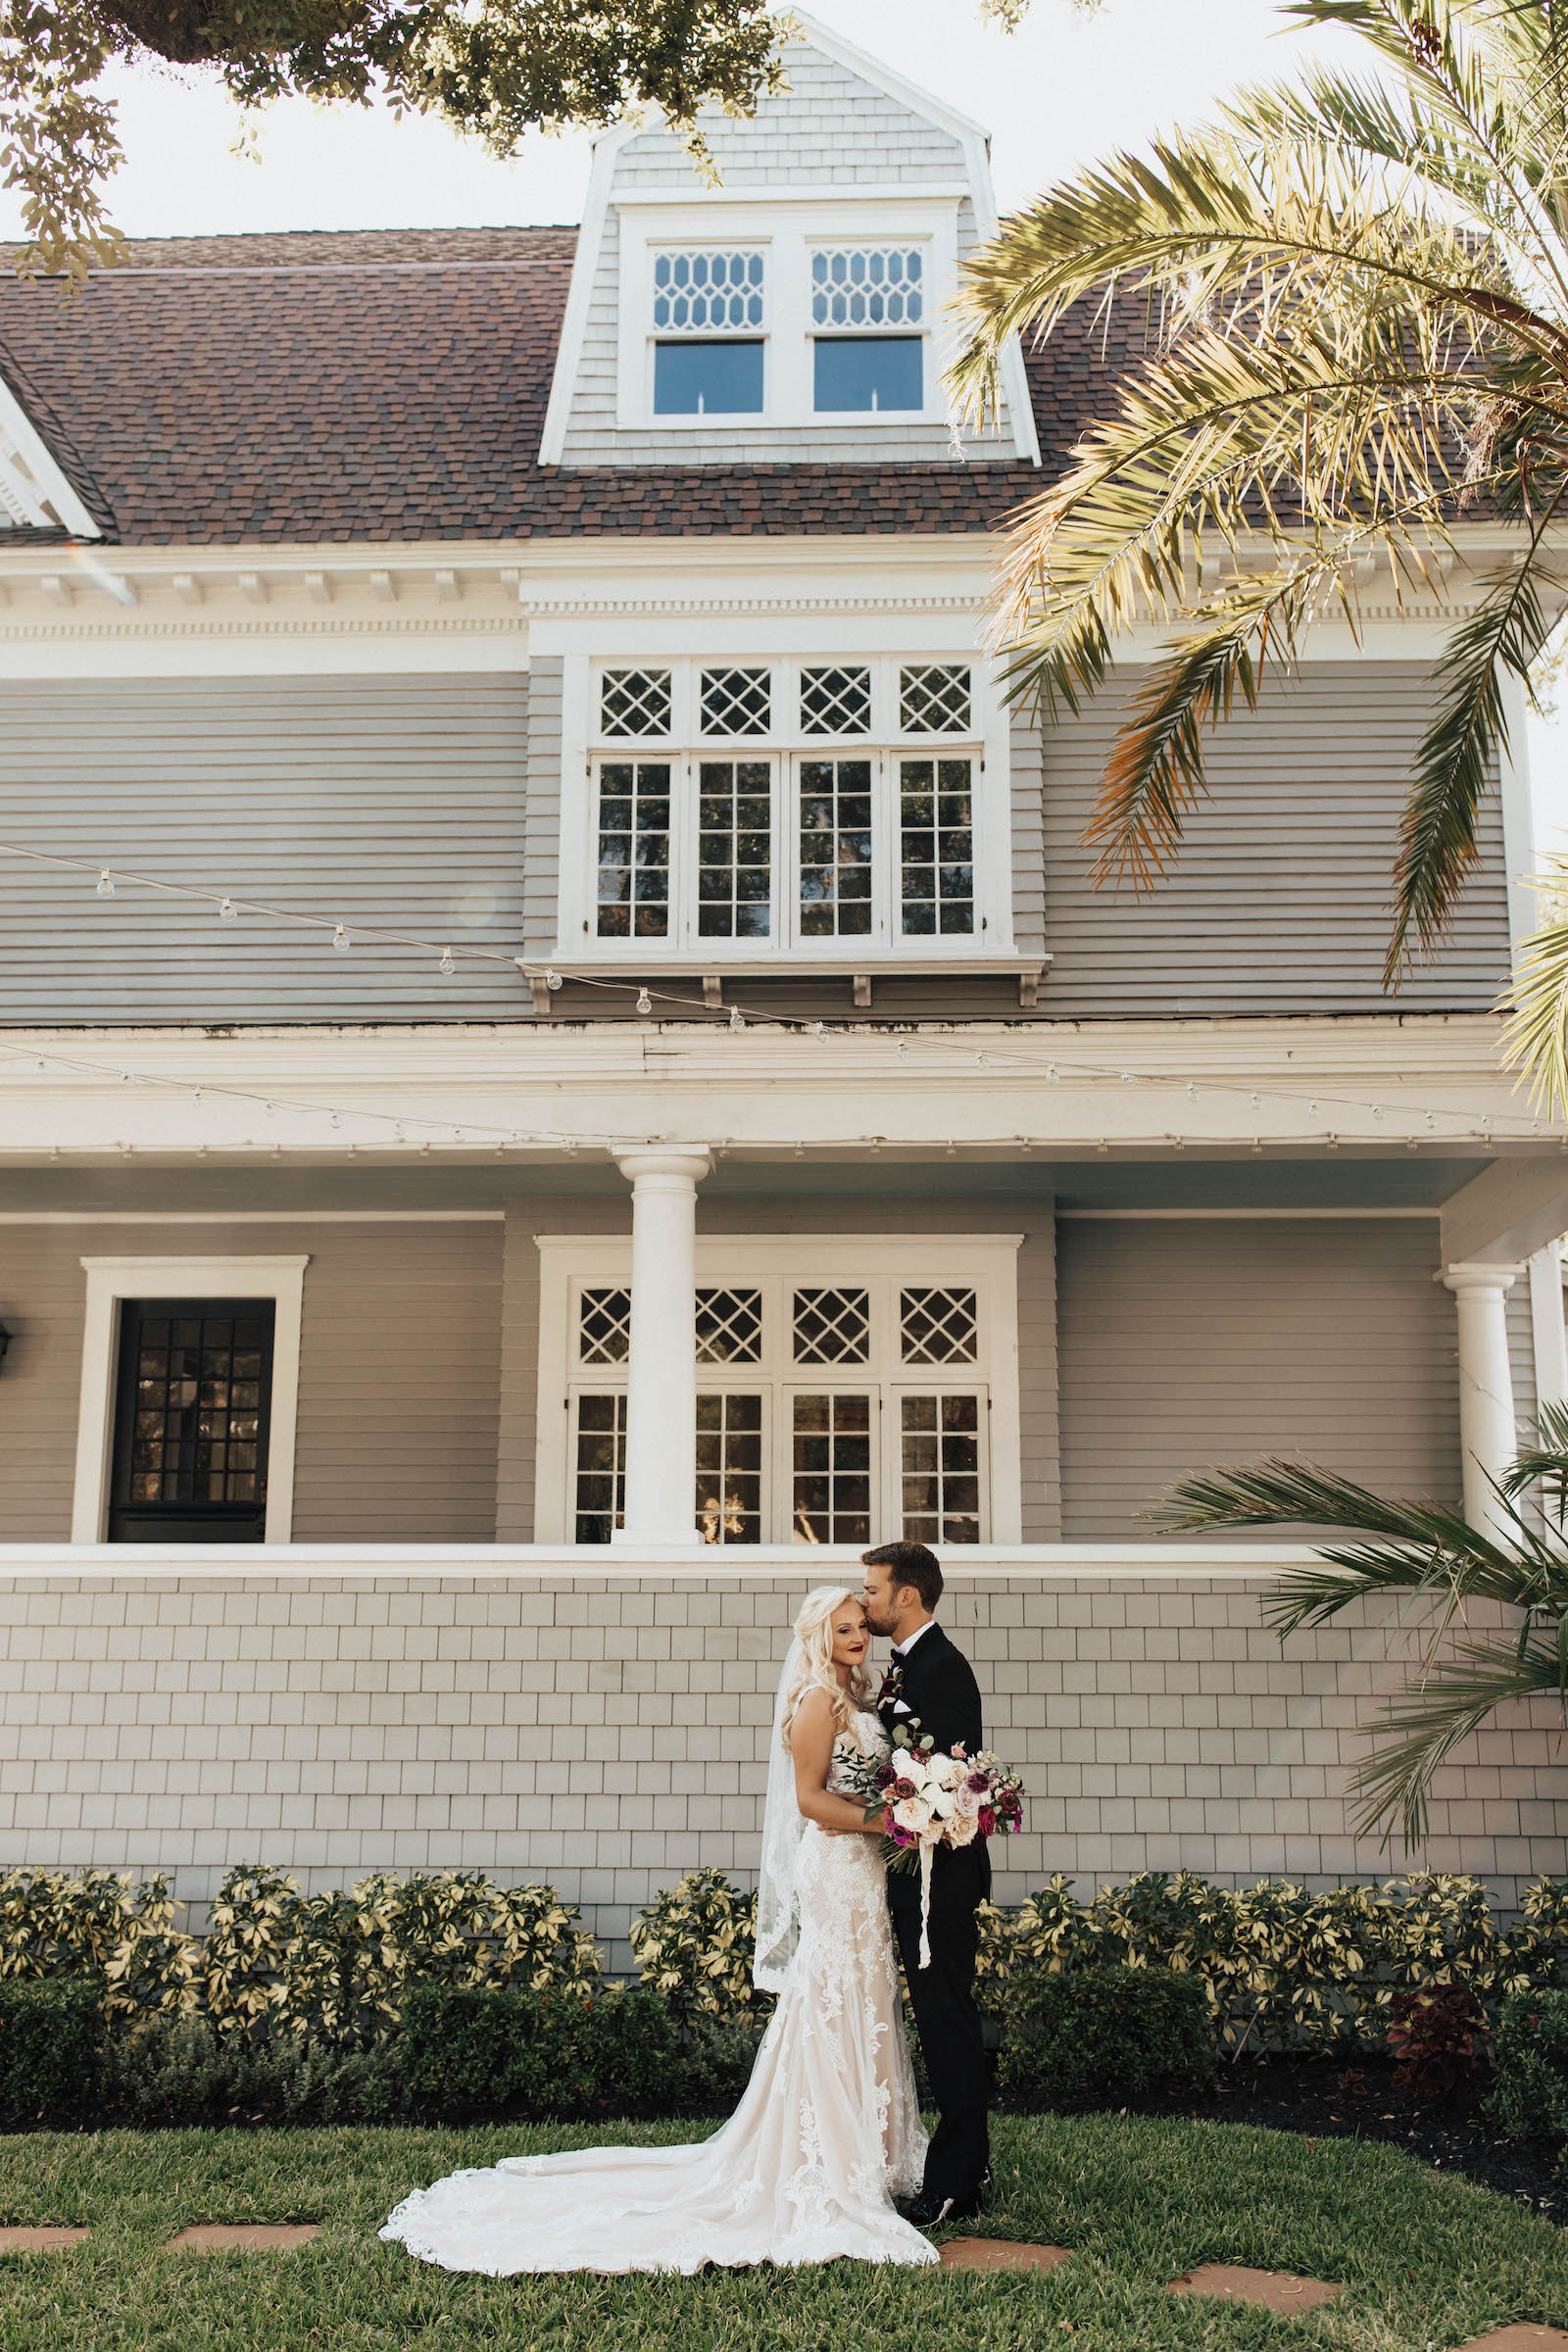 Warm Romantic Neutral Wedding, Bride Wearing Lace and Illusion with Nude Lining Wedding Dress First Look with Groom | South Tampa Wedding Planner Coastal Coordinating